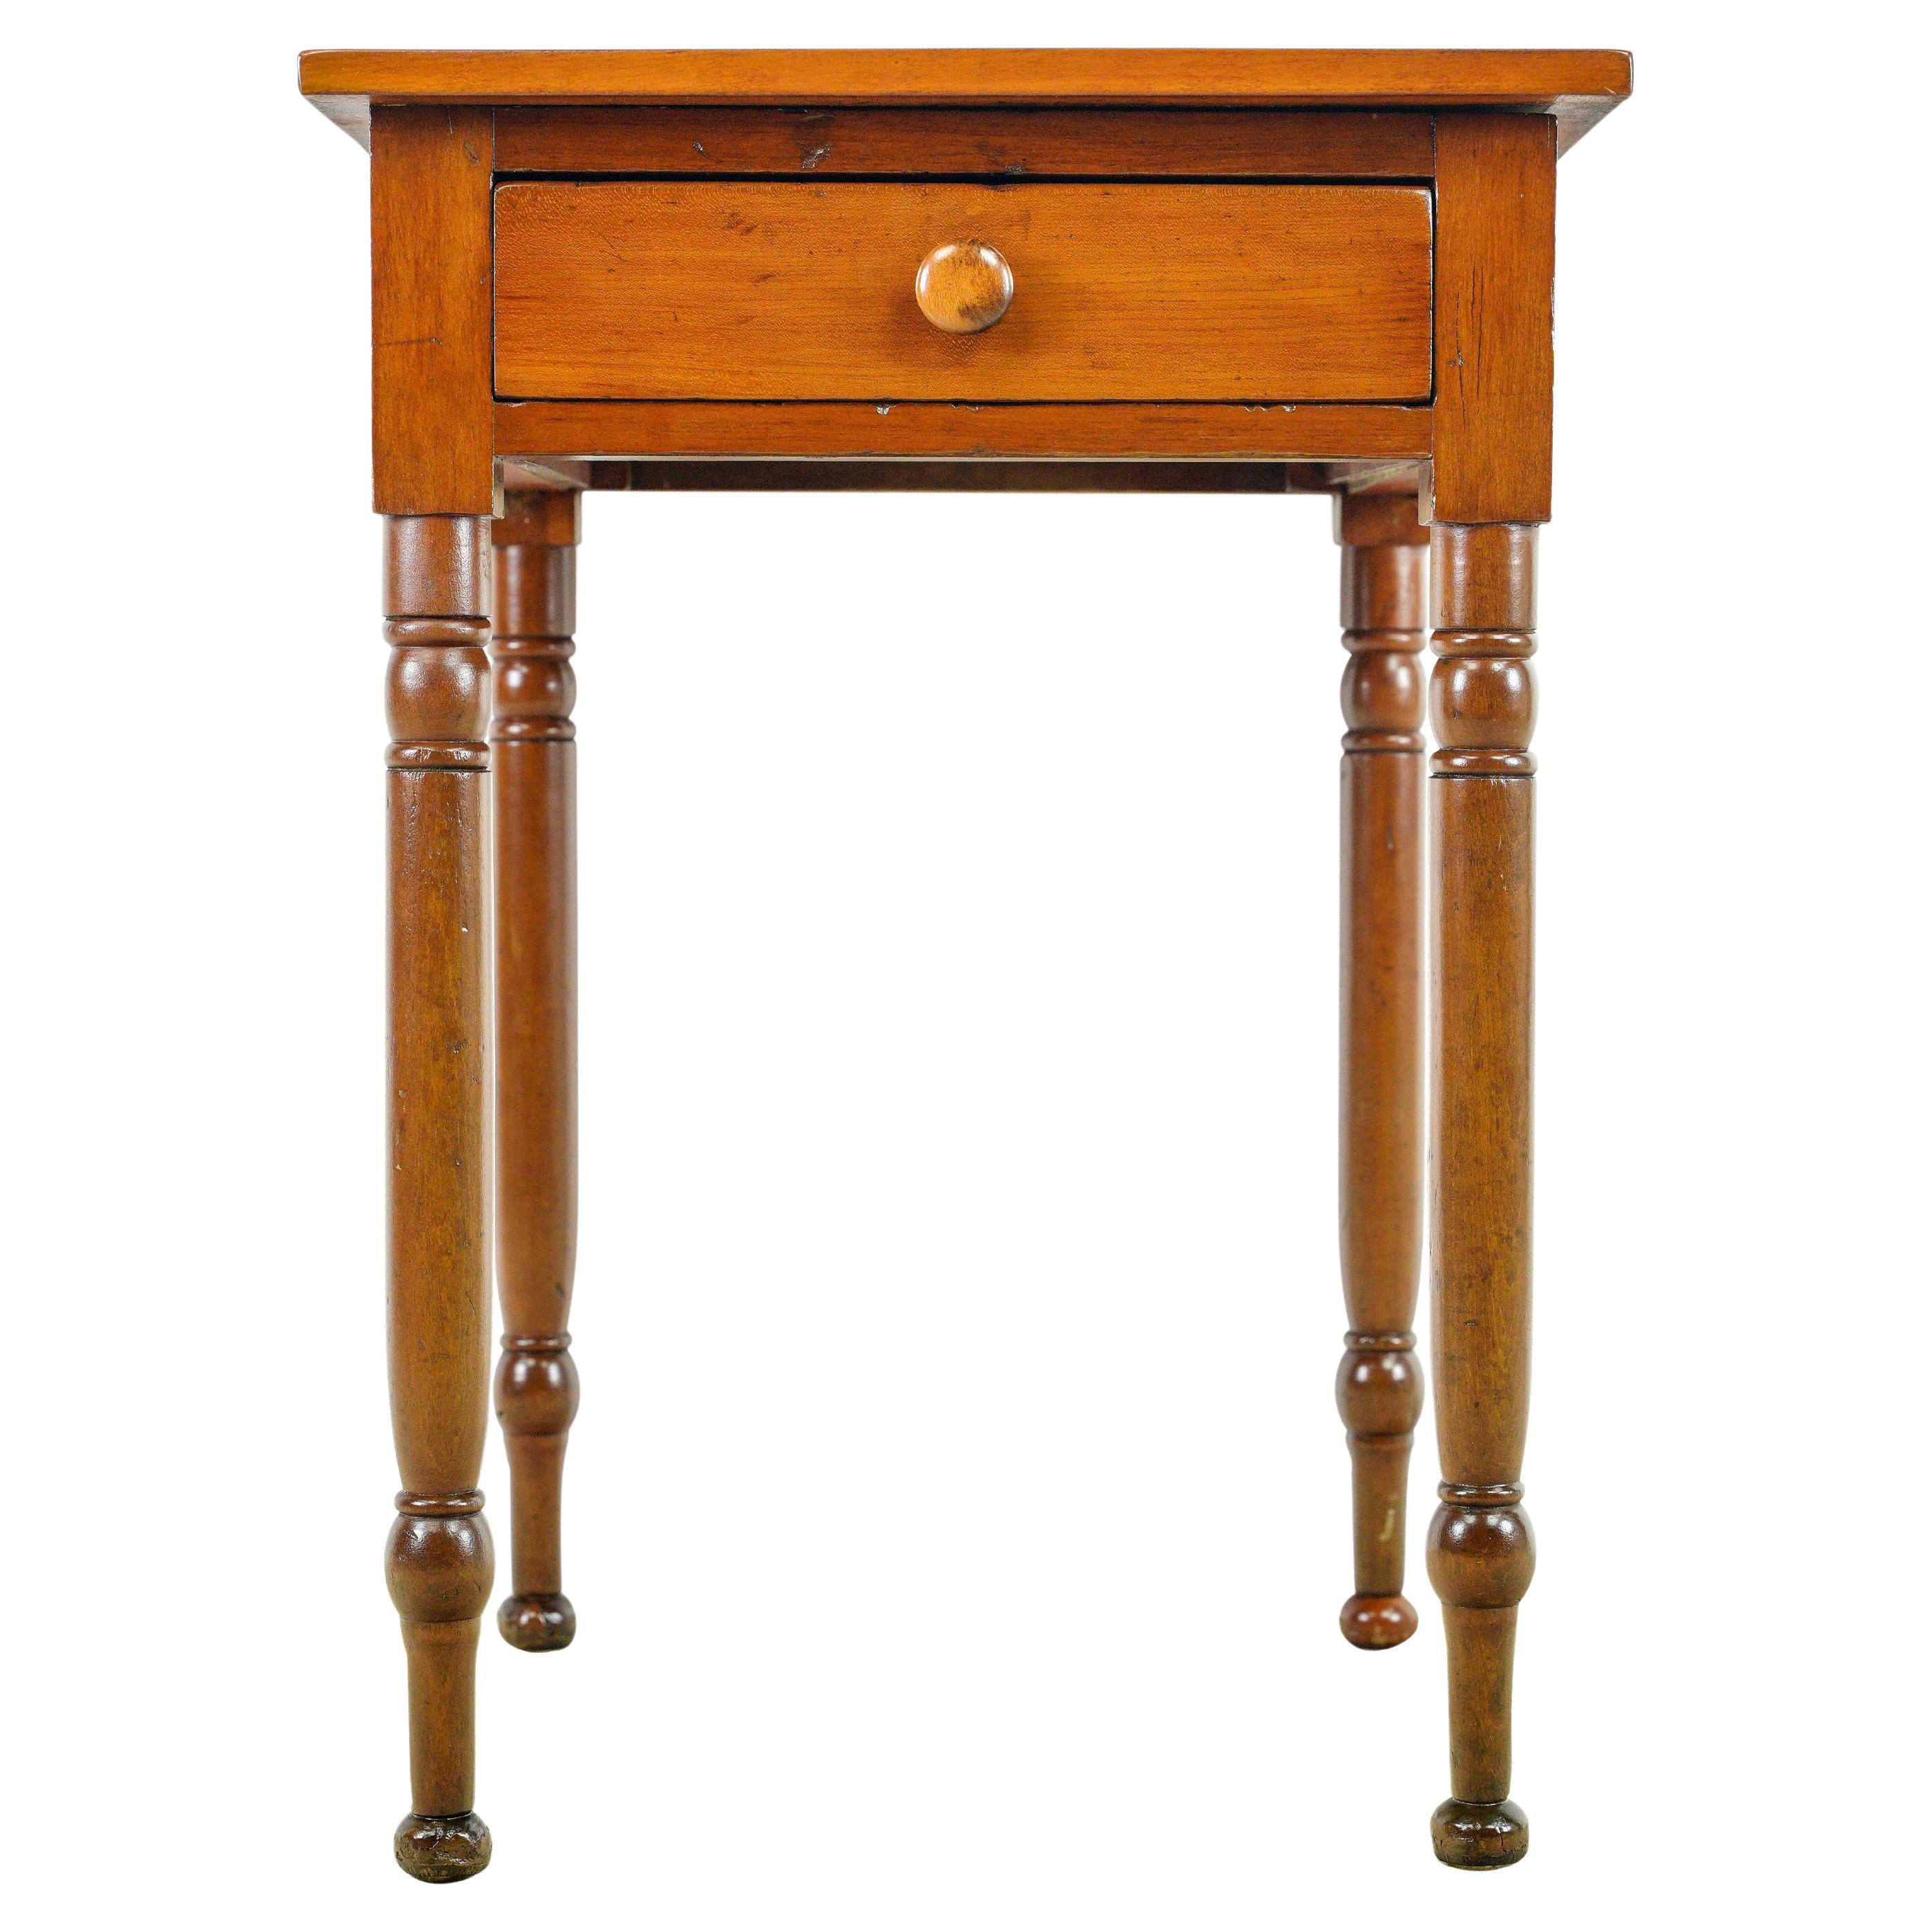 Antique Refinished Cherry Drawer Square End Table Stand